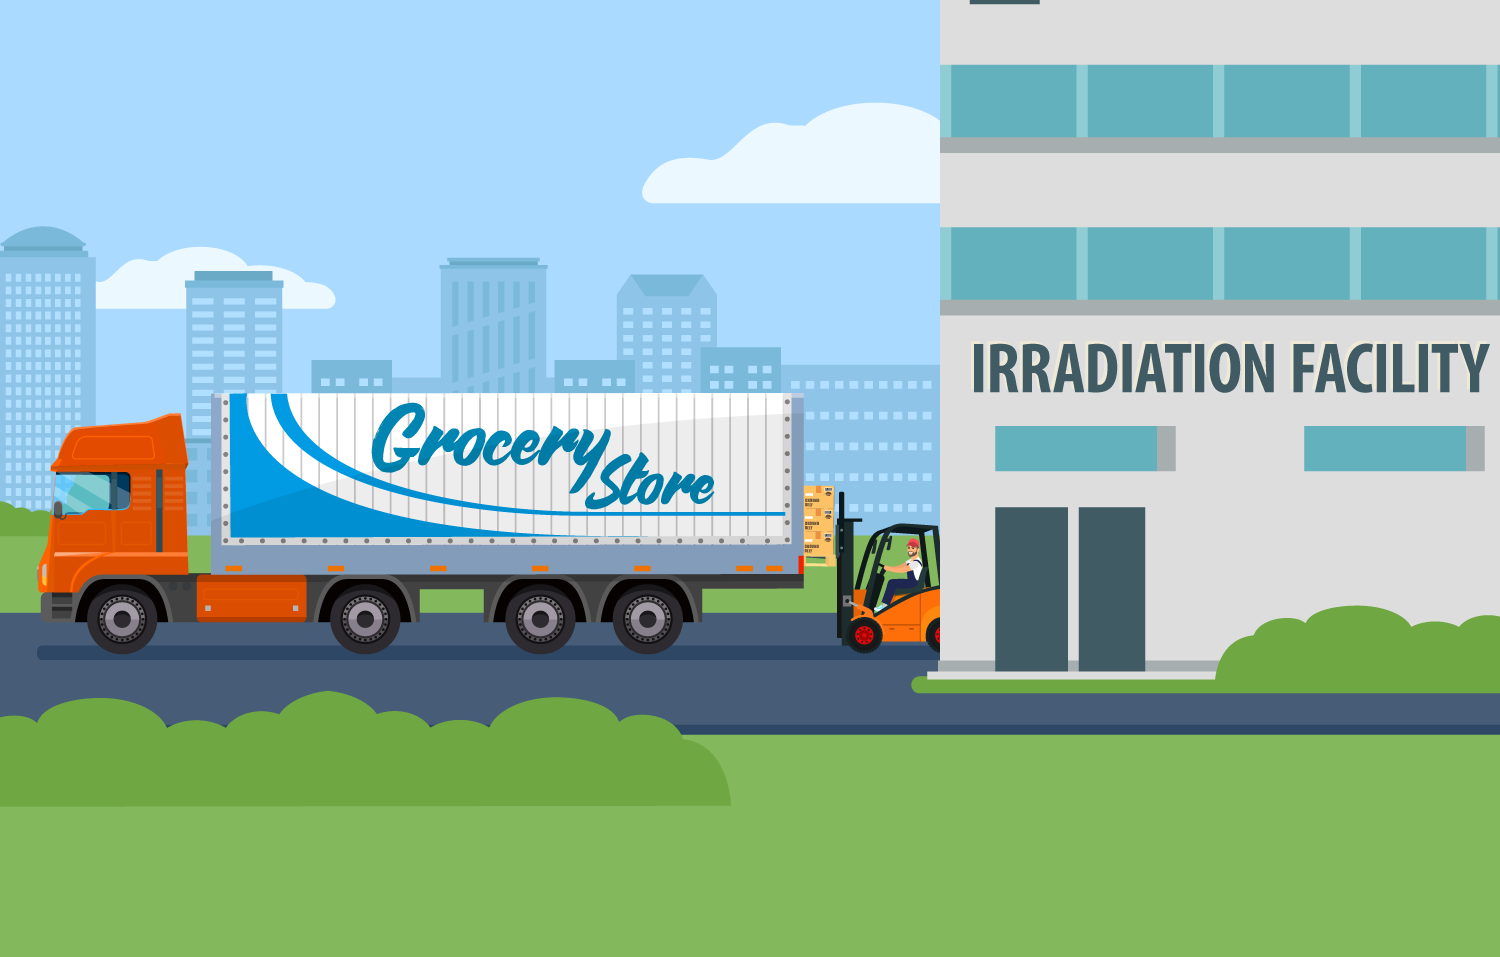 A truck is outside an irradiation facility getting ready to head to a grocery store.